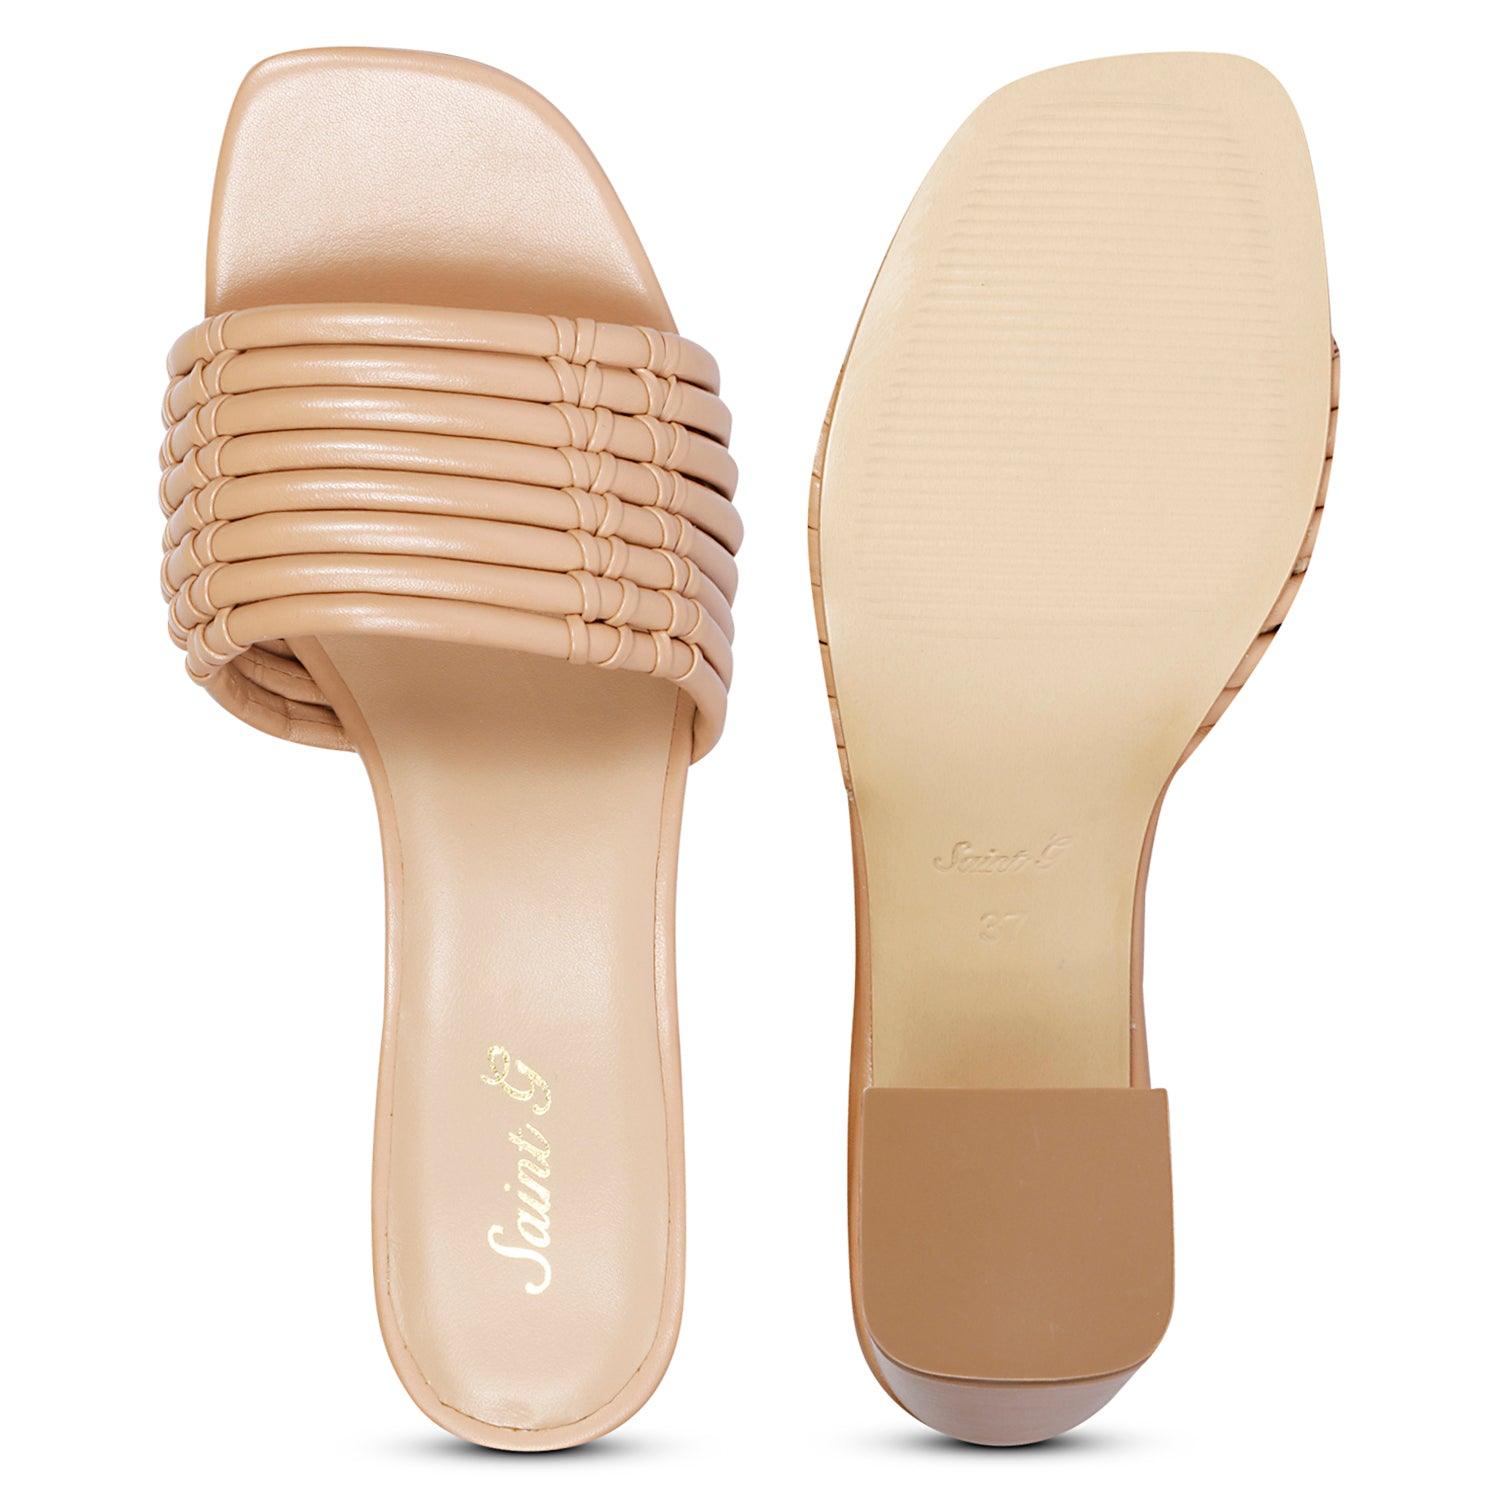 Bethany Nude Sandals